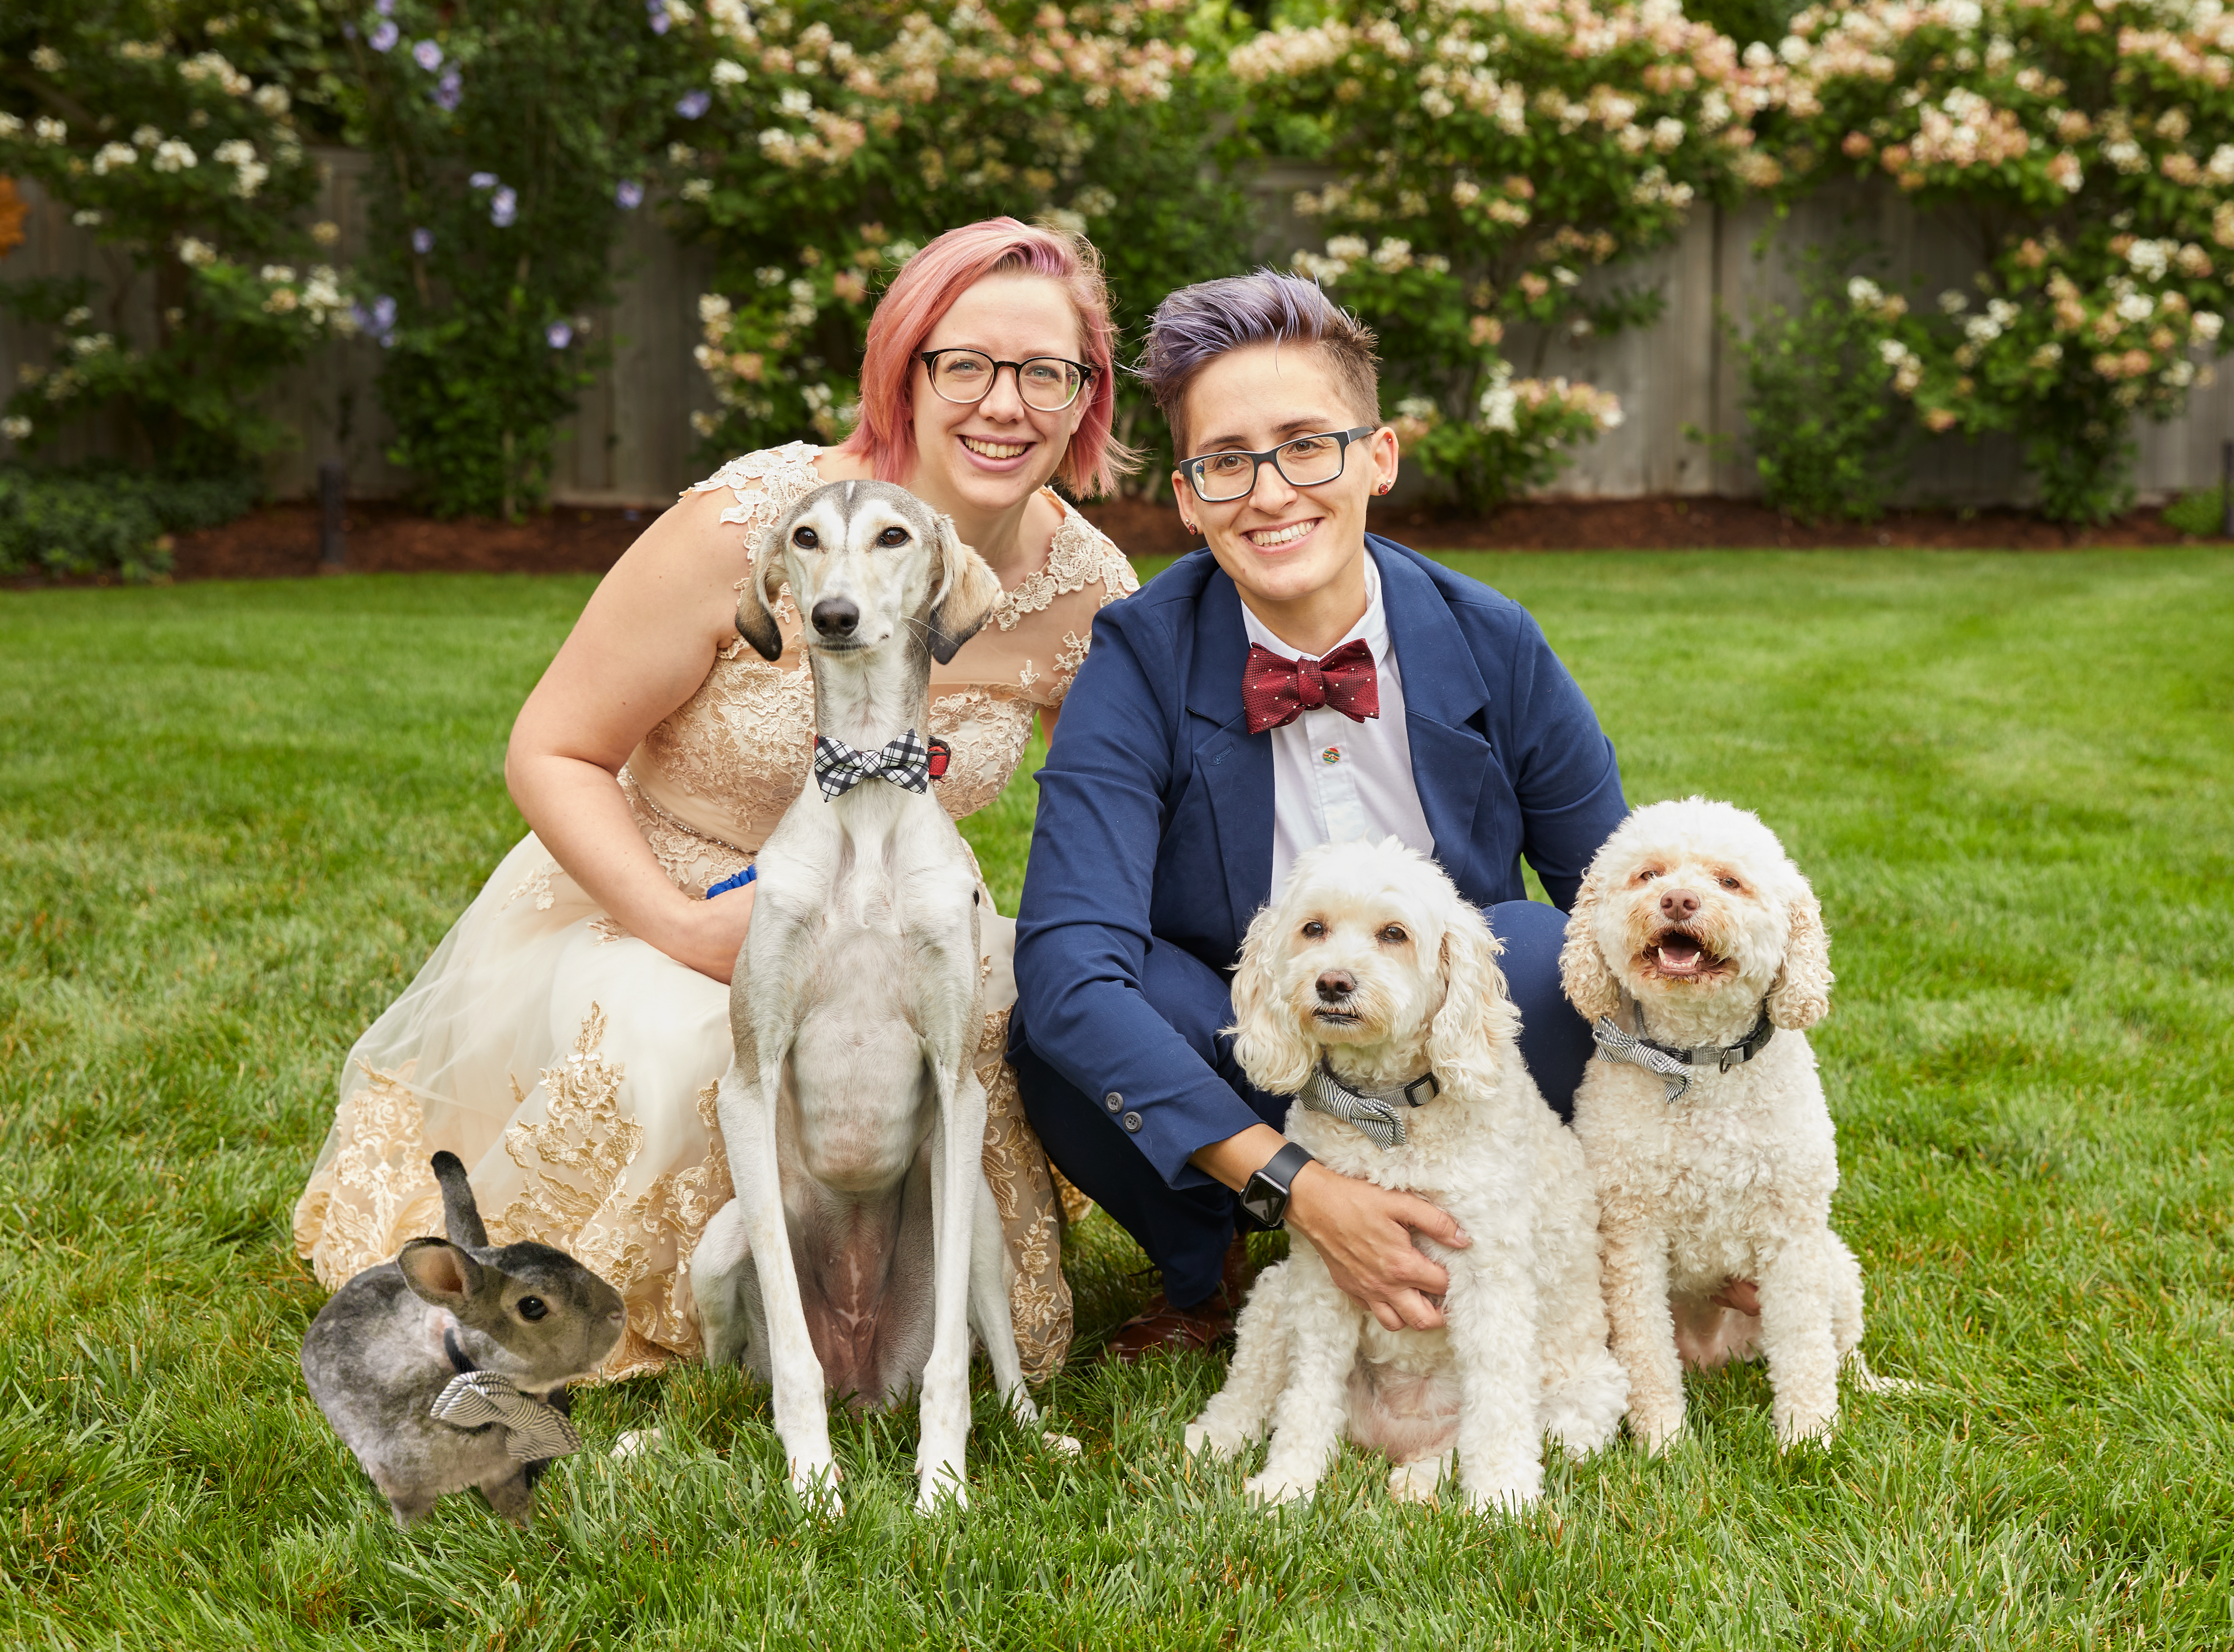 Tanya Josek, their wife, and their three dogs posed in formal attire for a wedding photo. Their pet rabbit is photoshopped into the image.